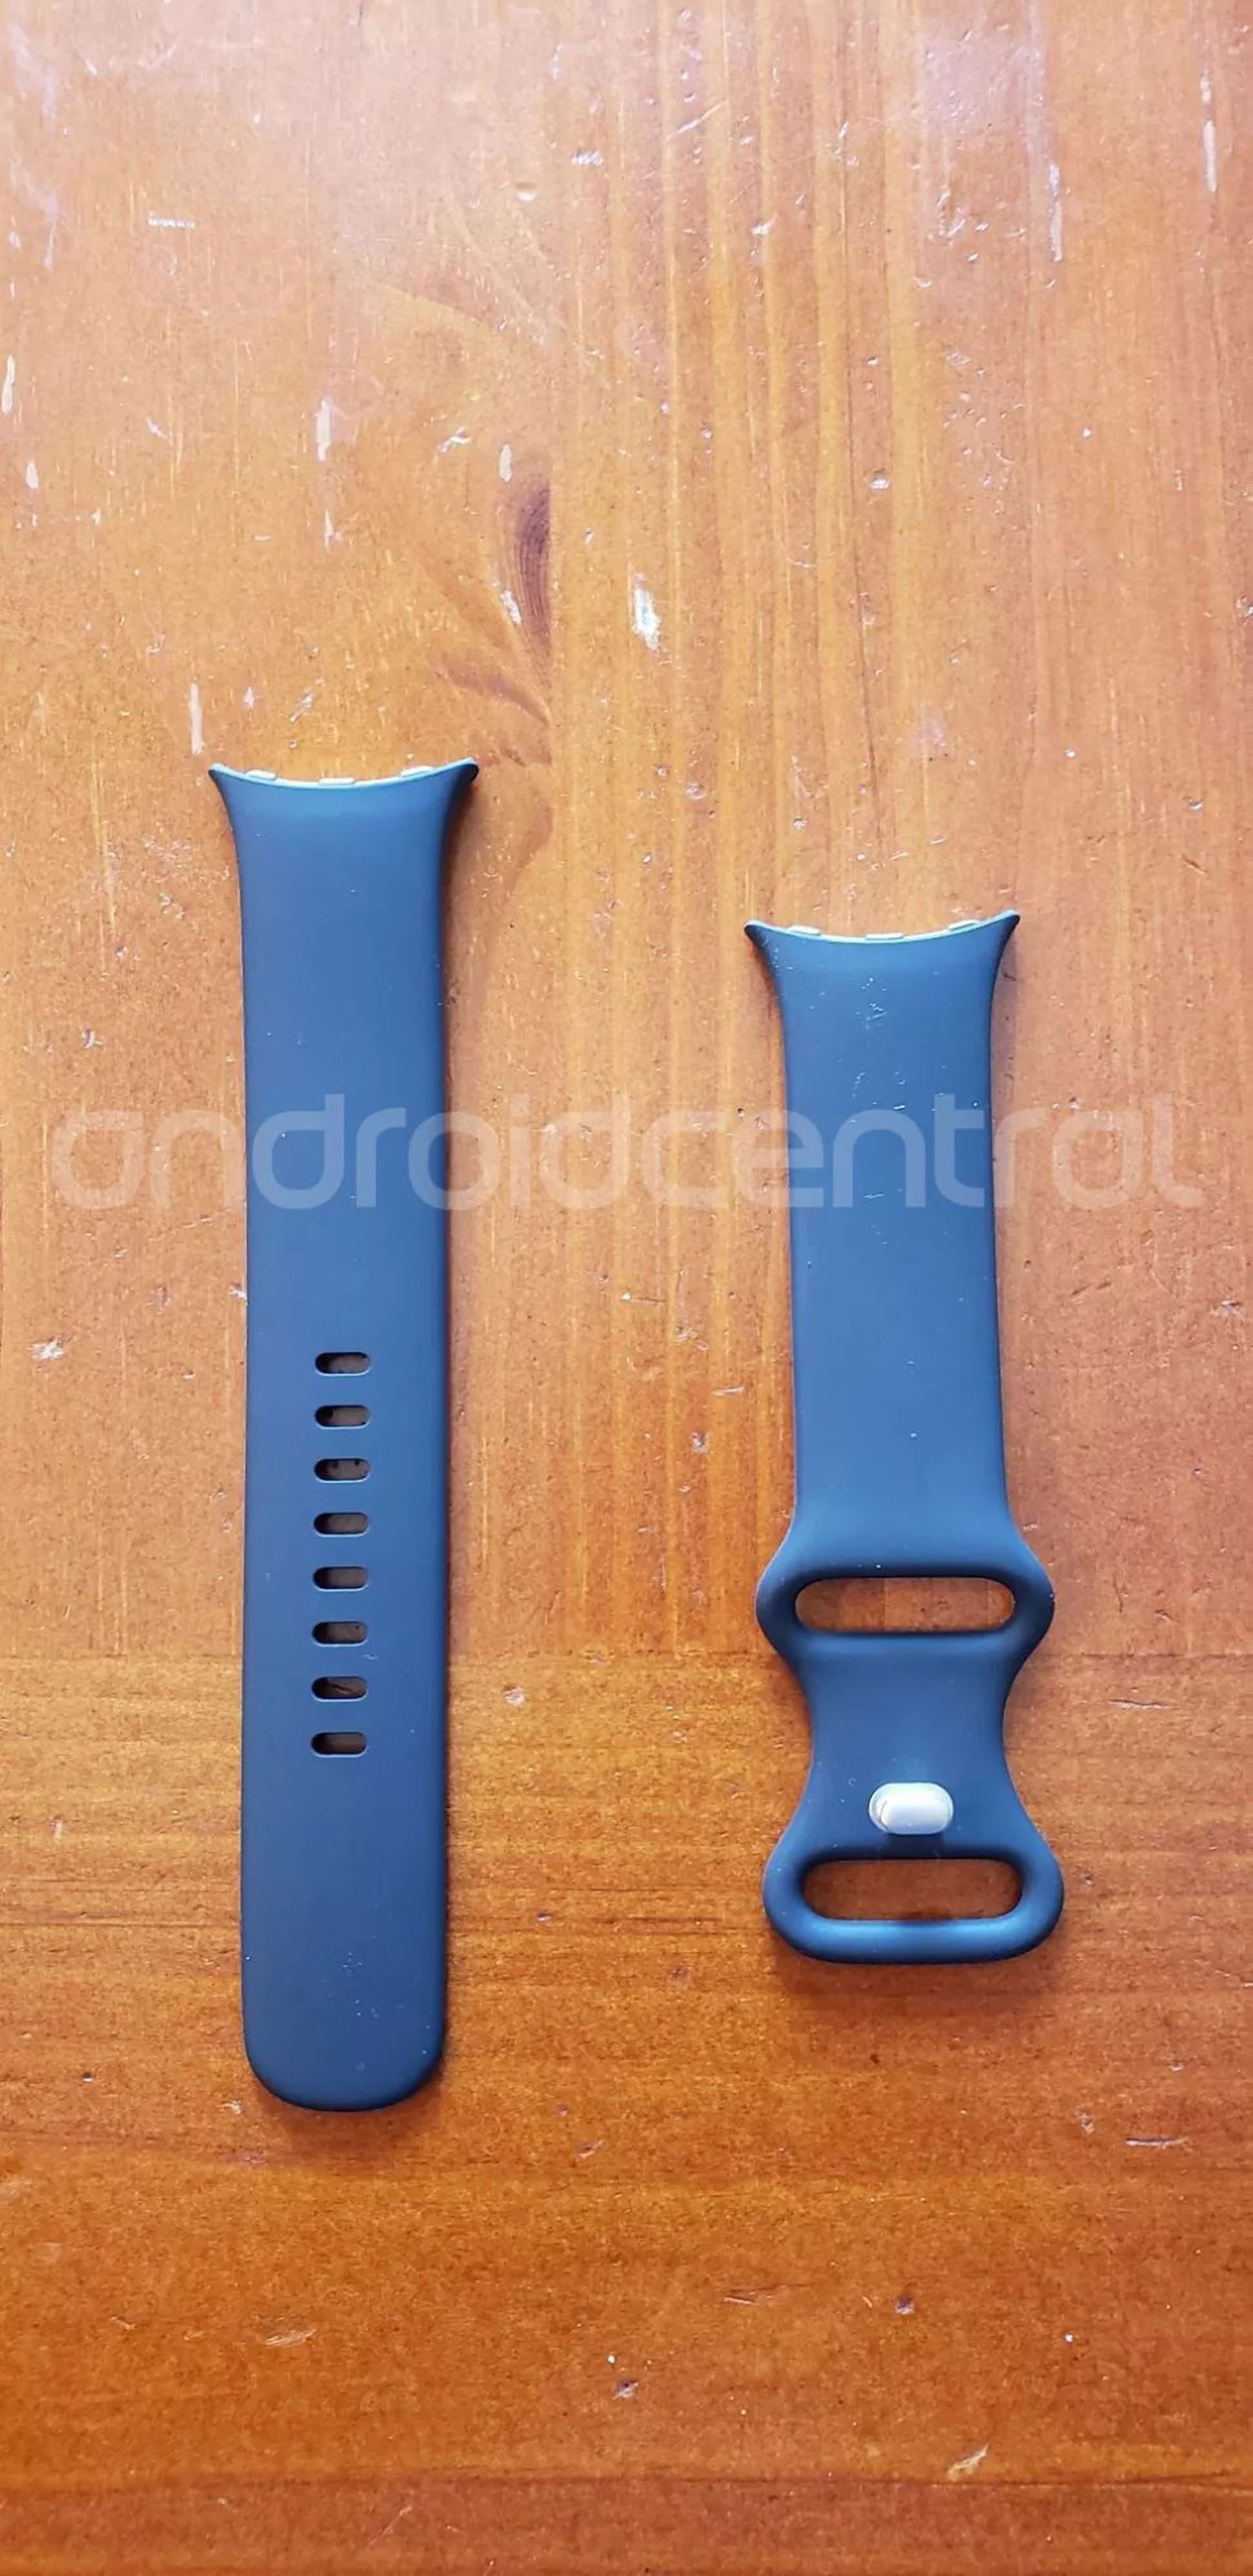 The strap looks similar to the ones found on the Fitbit Versa and Sense smartwatches.